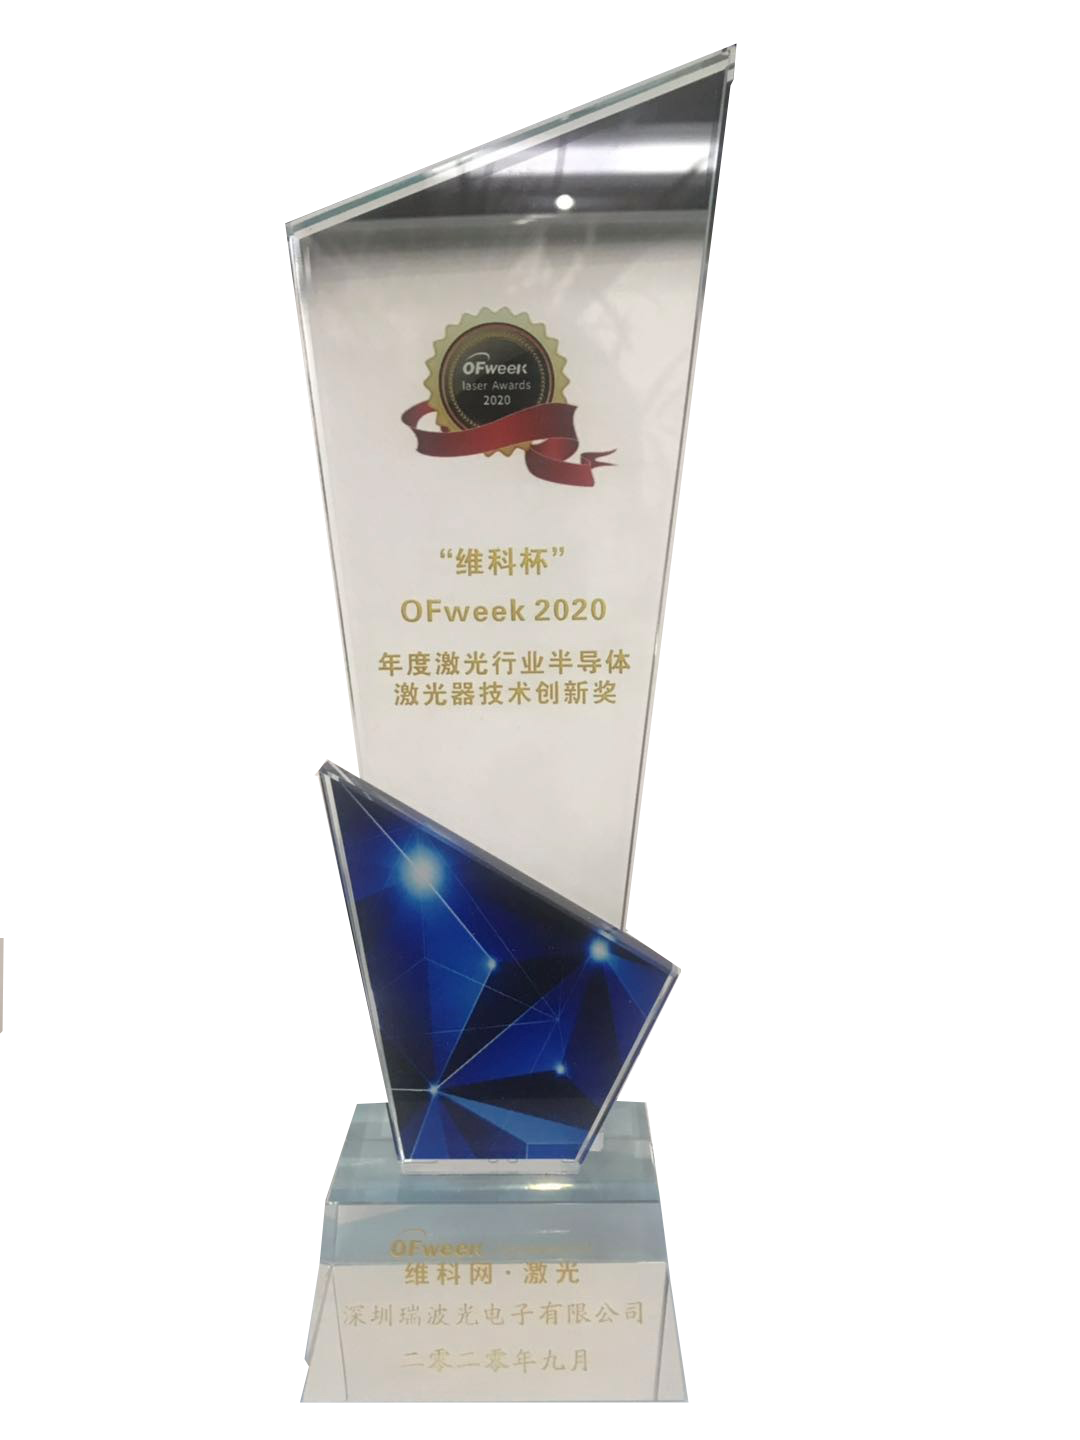 OFweek2020 semiconductor laser technology innovation award in the laser industry